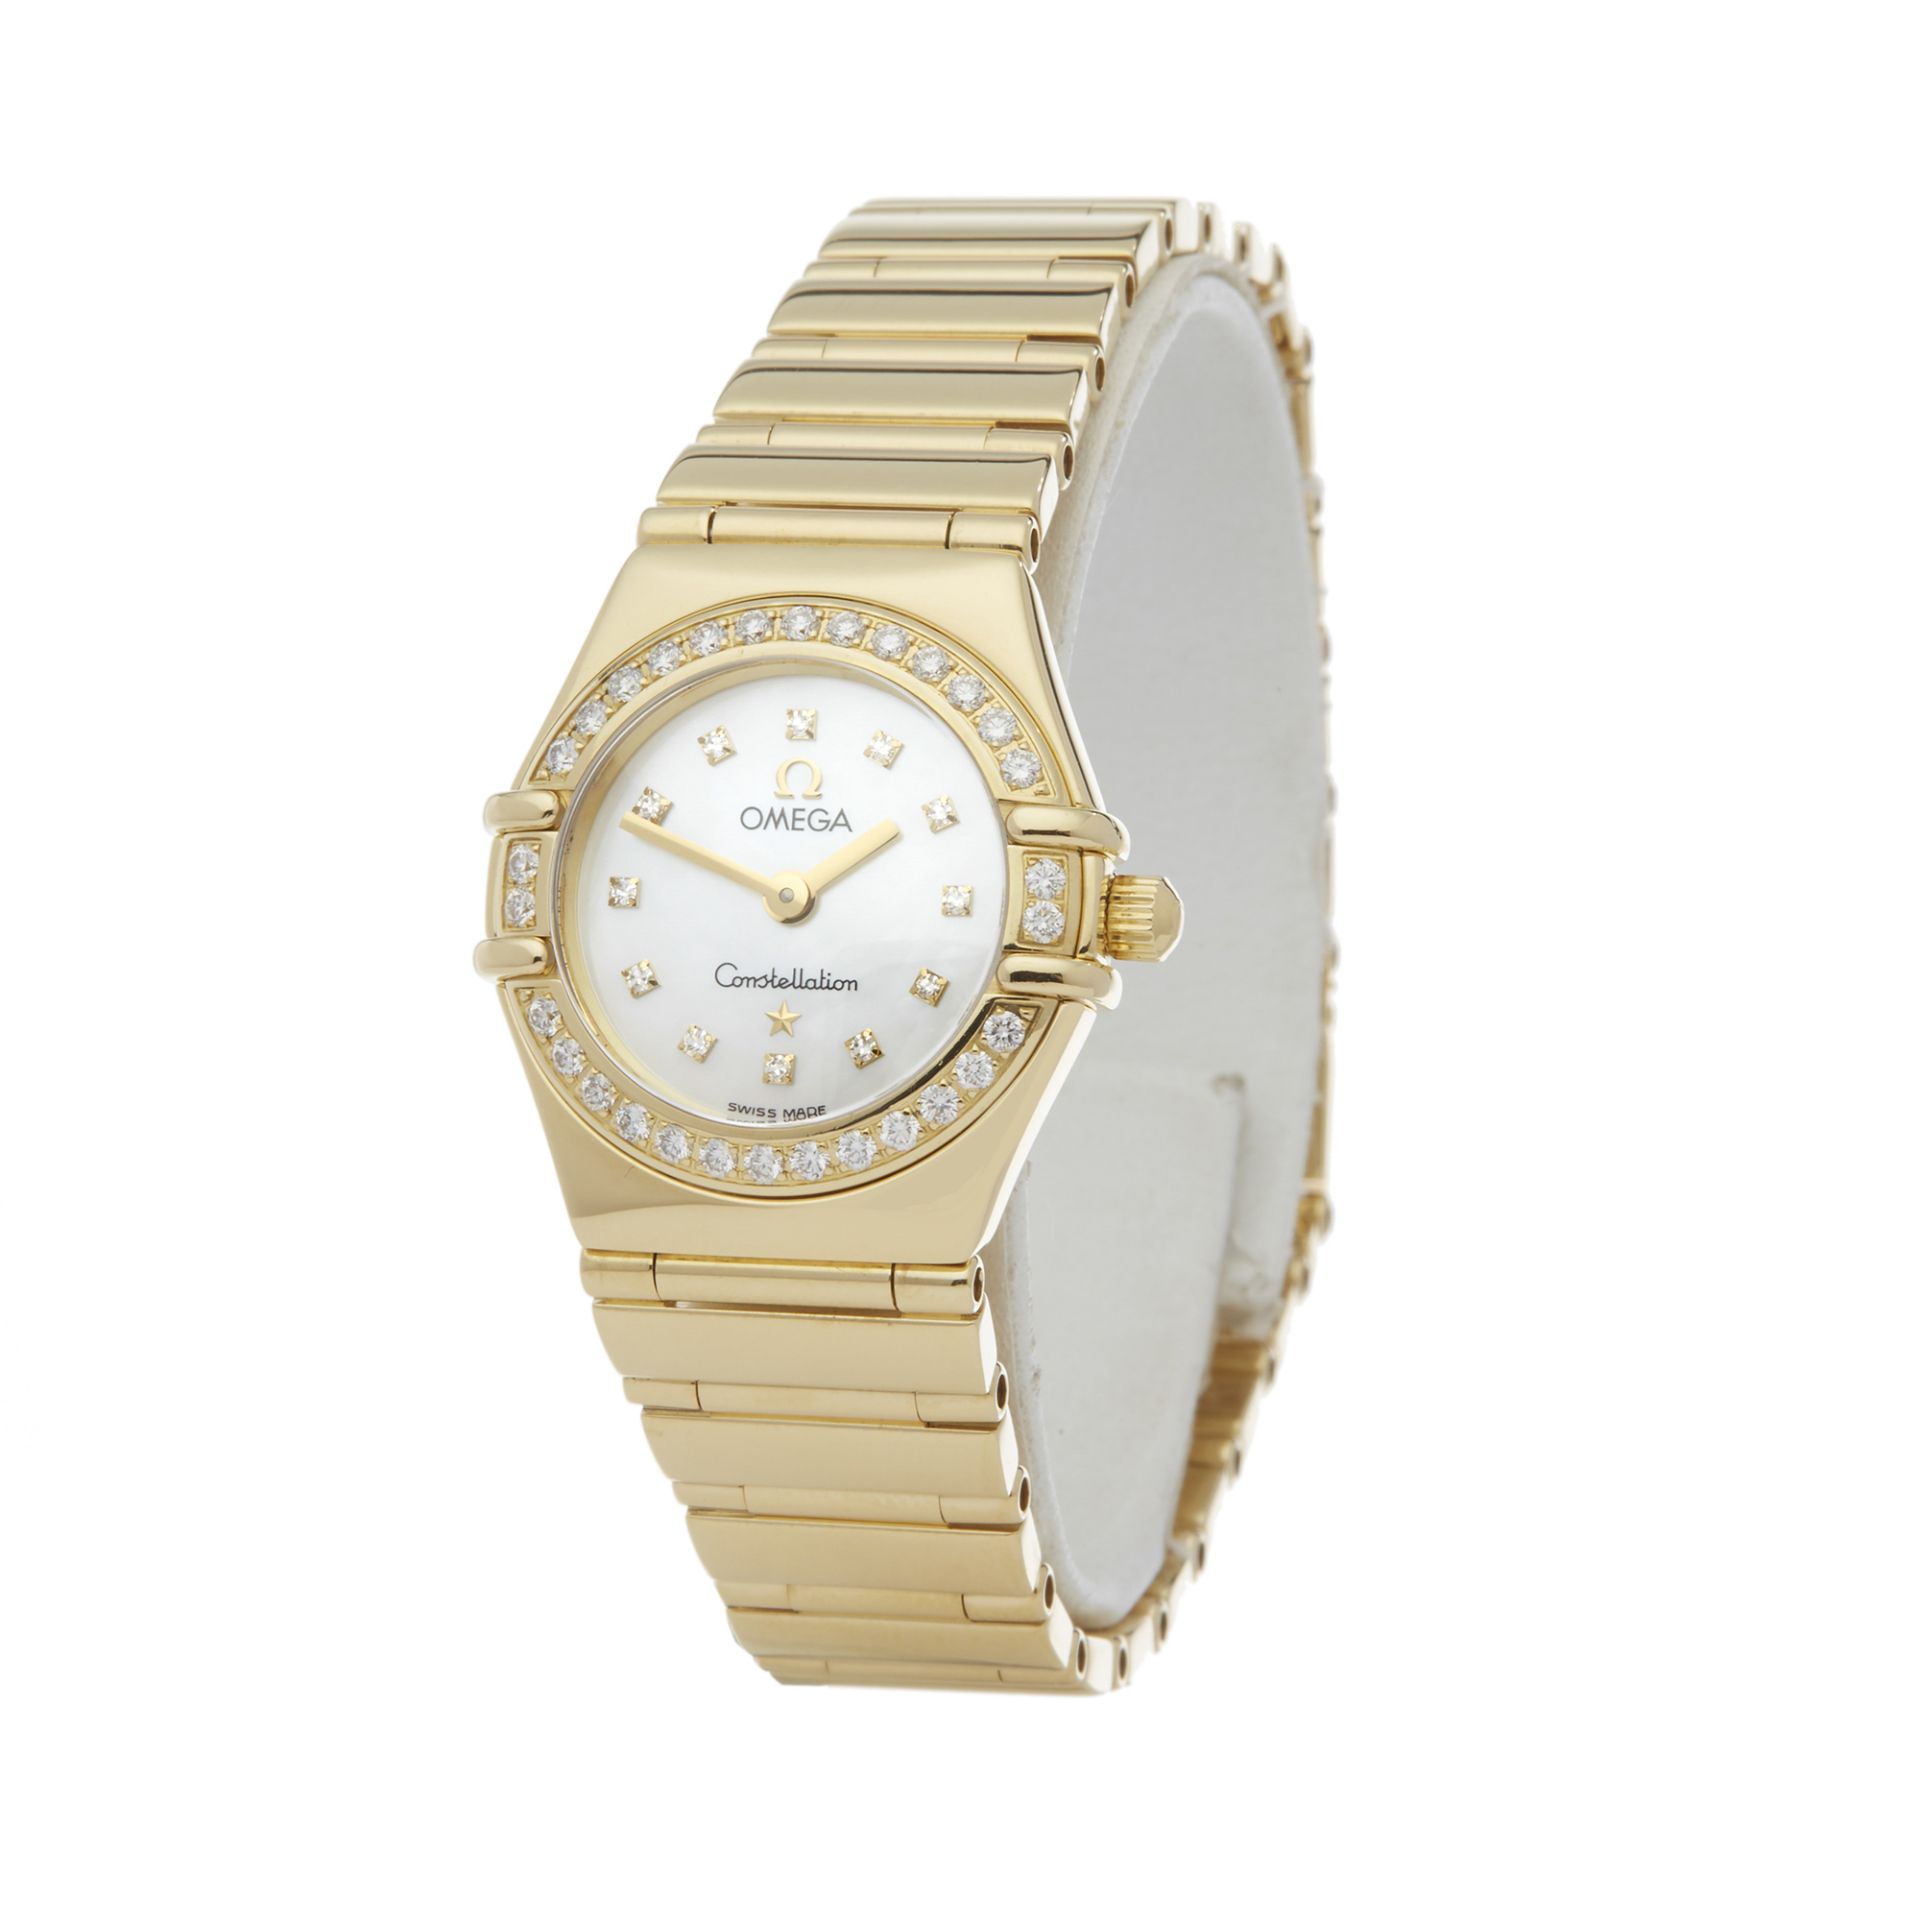 Omega Constellation Diamond Mother of Pearl 18k Yellow Gold - 11647500 - Image 7 of 7